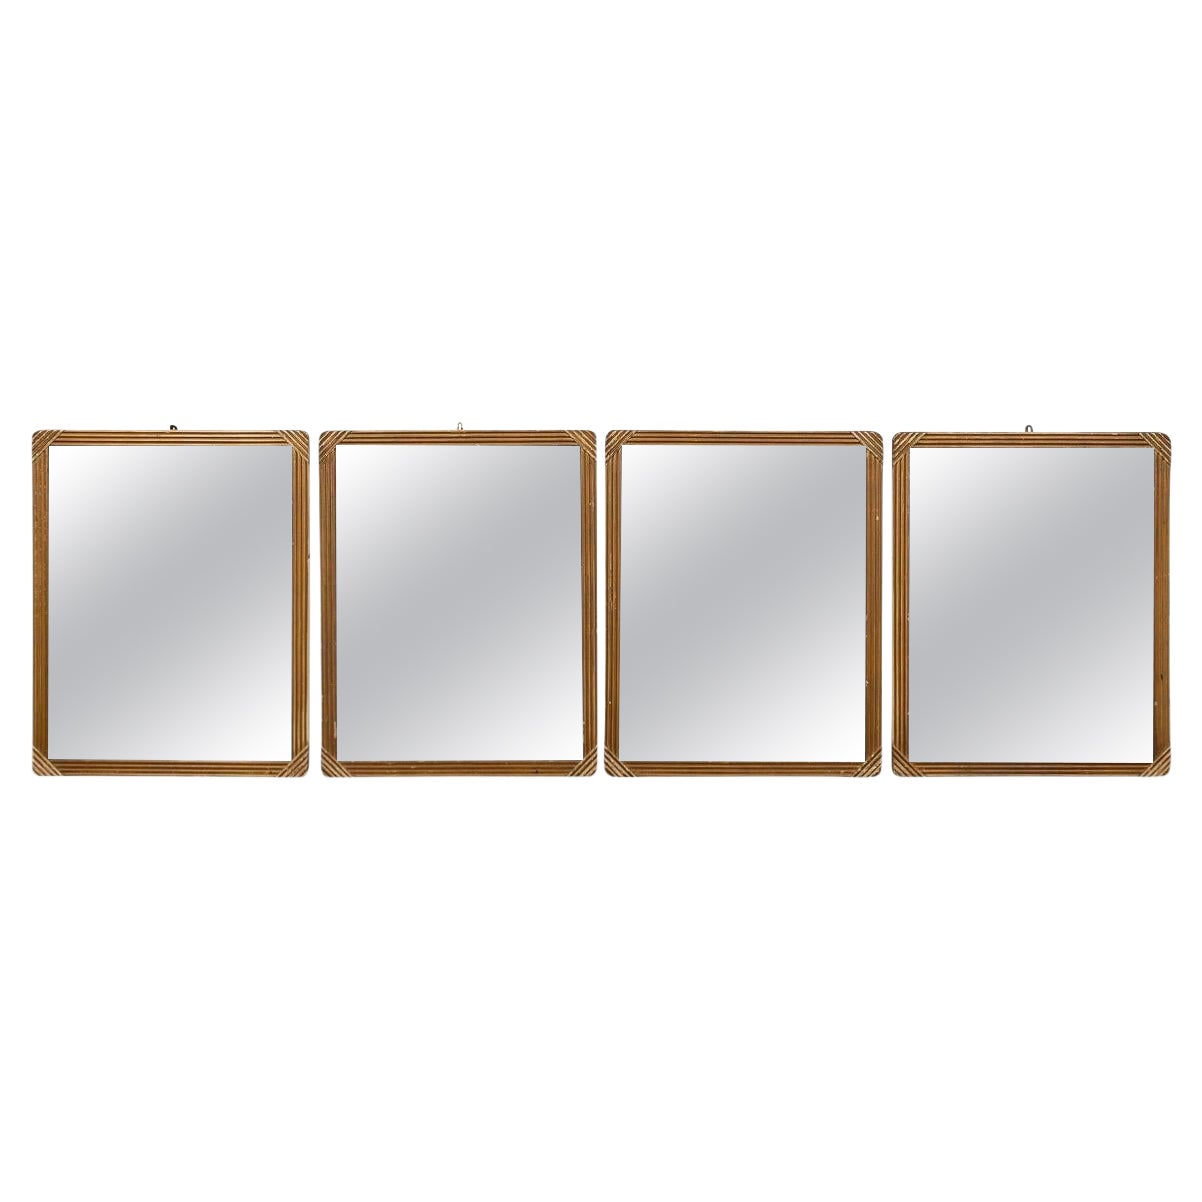 Antique 20th Century Set Of Four Gilt Framed Mirrors c.1920 For Sale